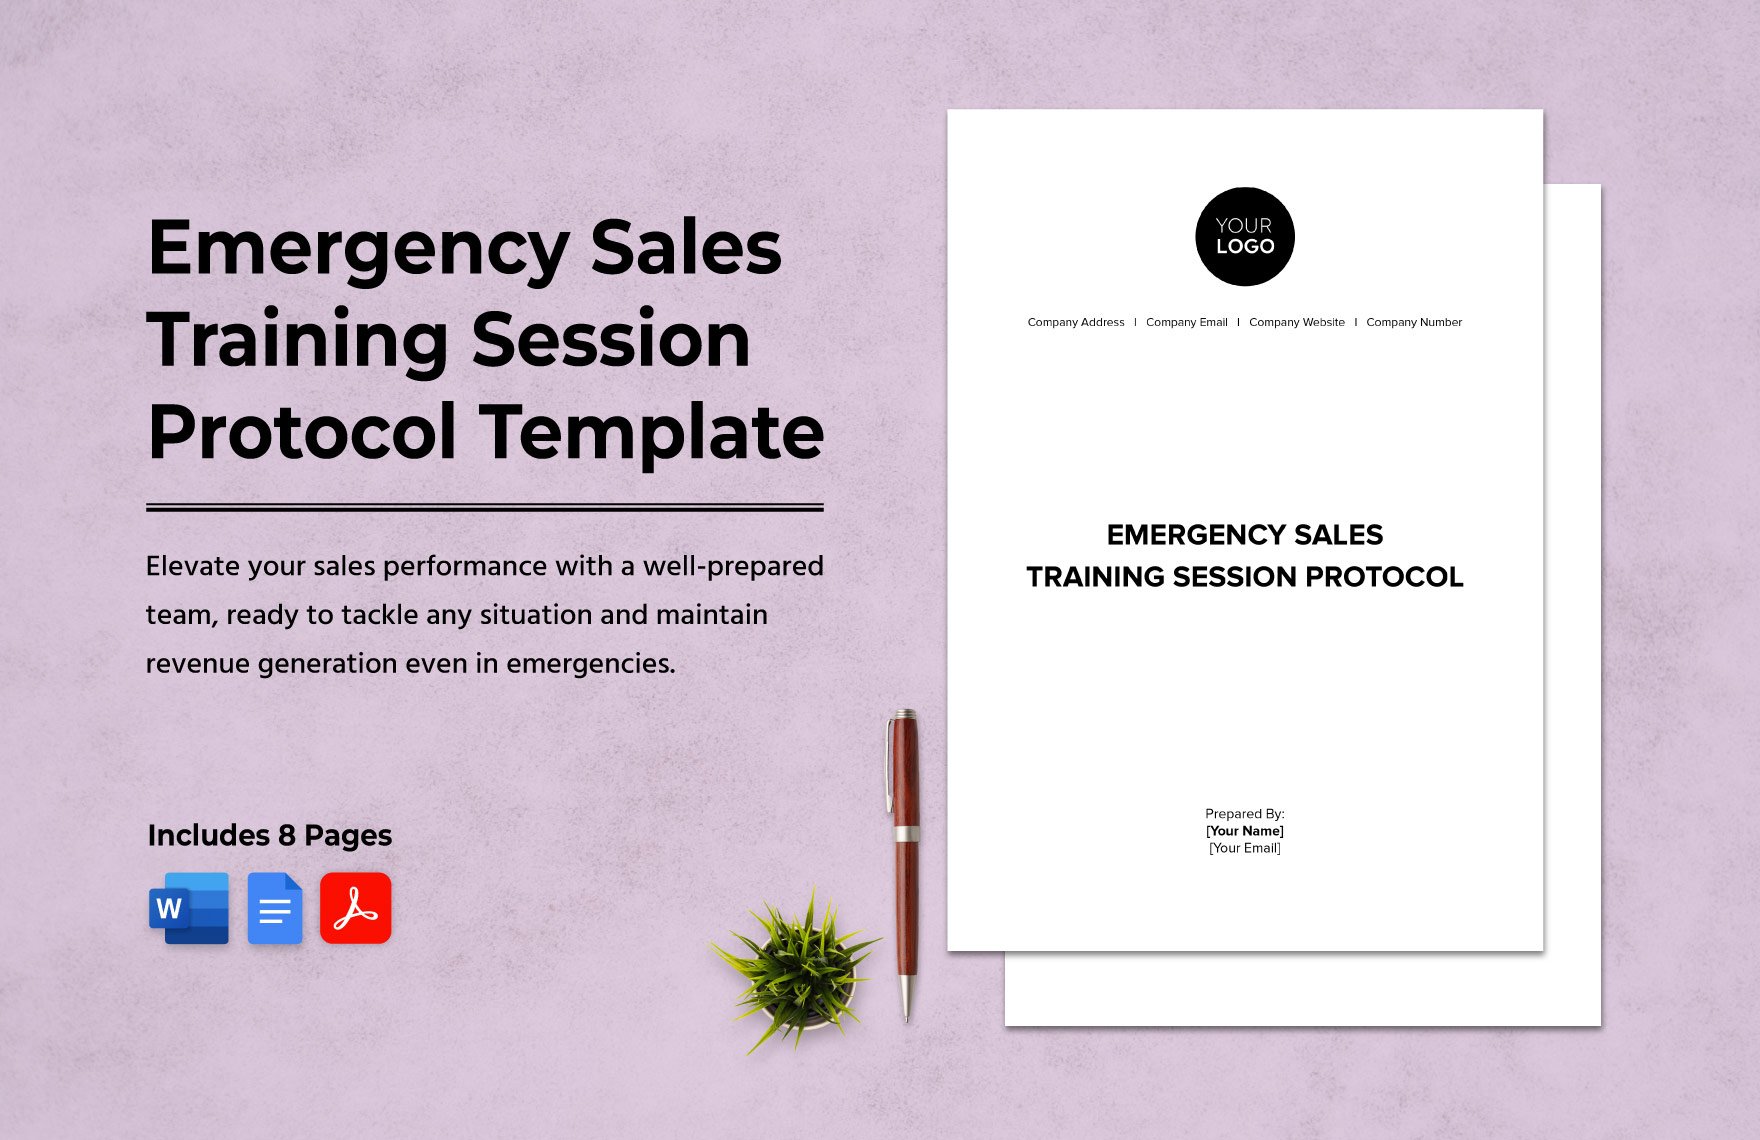 Emergency Sales Training Session Protocol Template